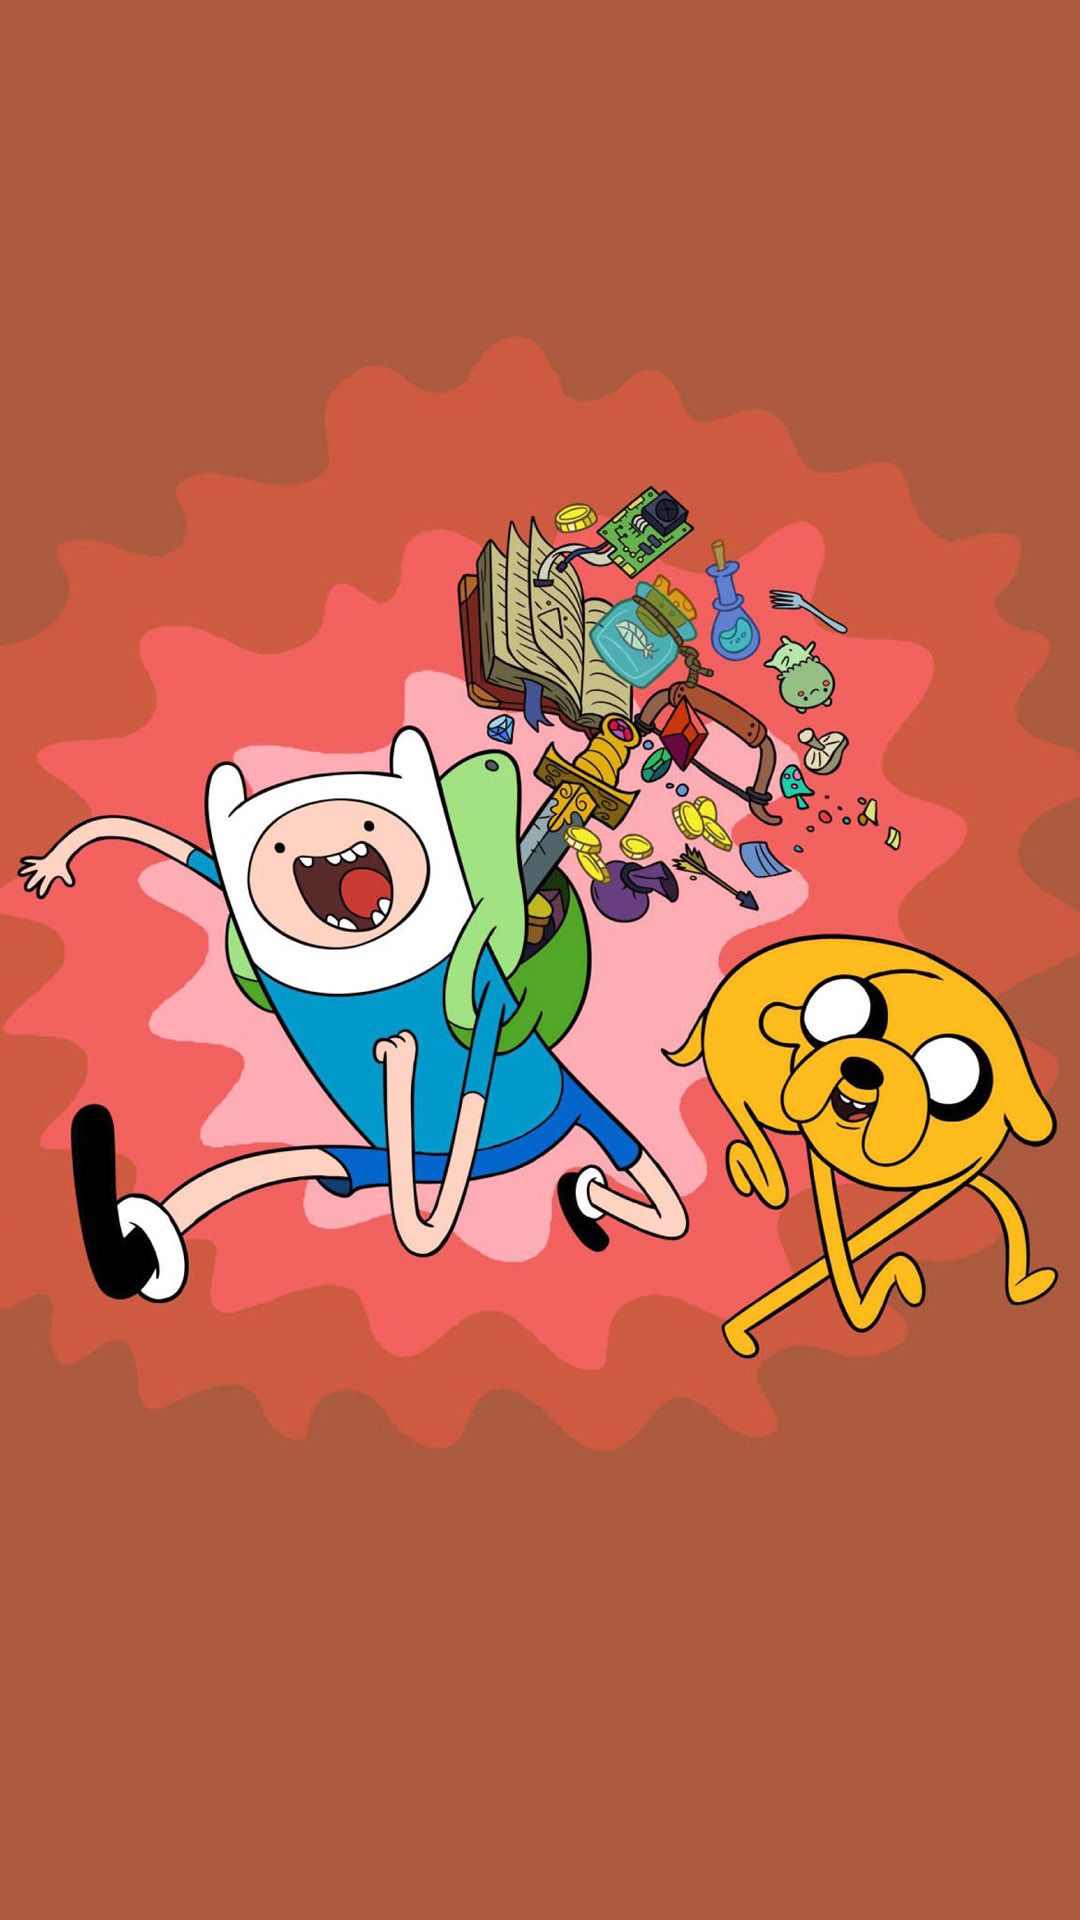 Adventure time wallpapers for mobile phone in 720x1280